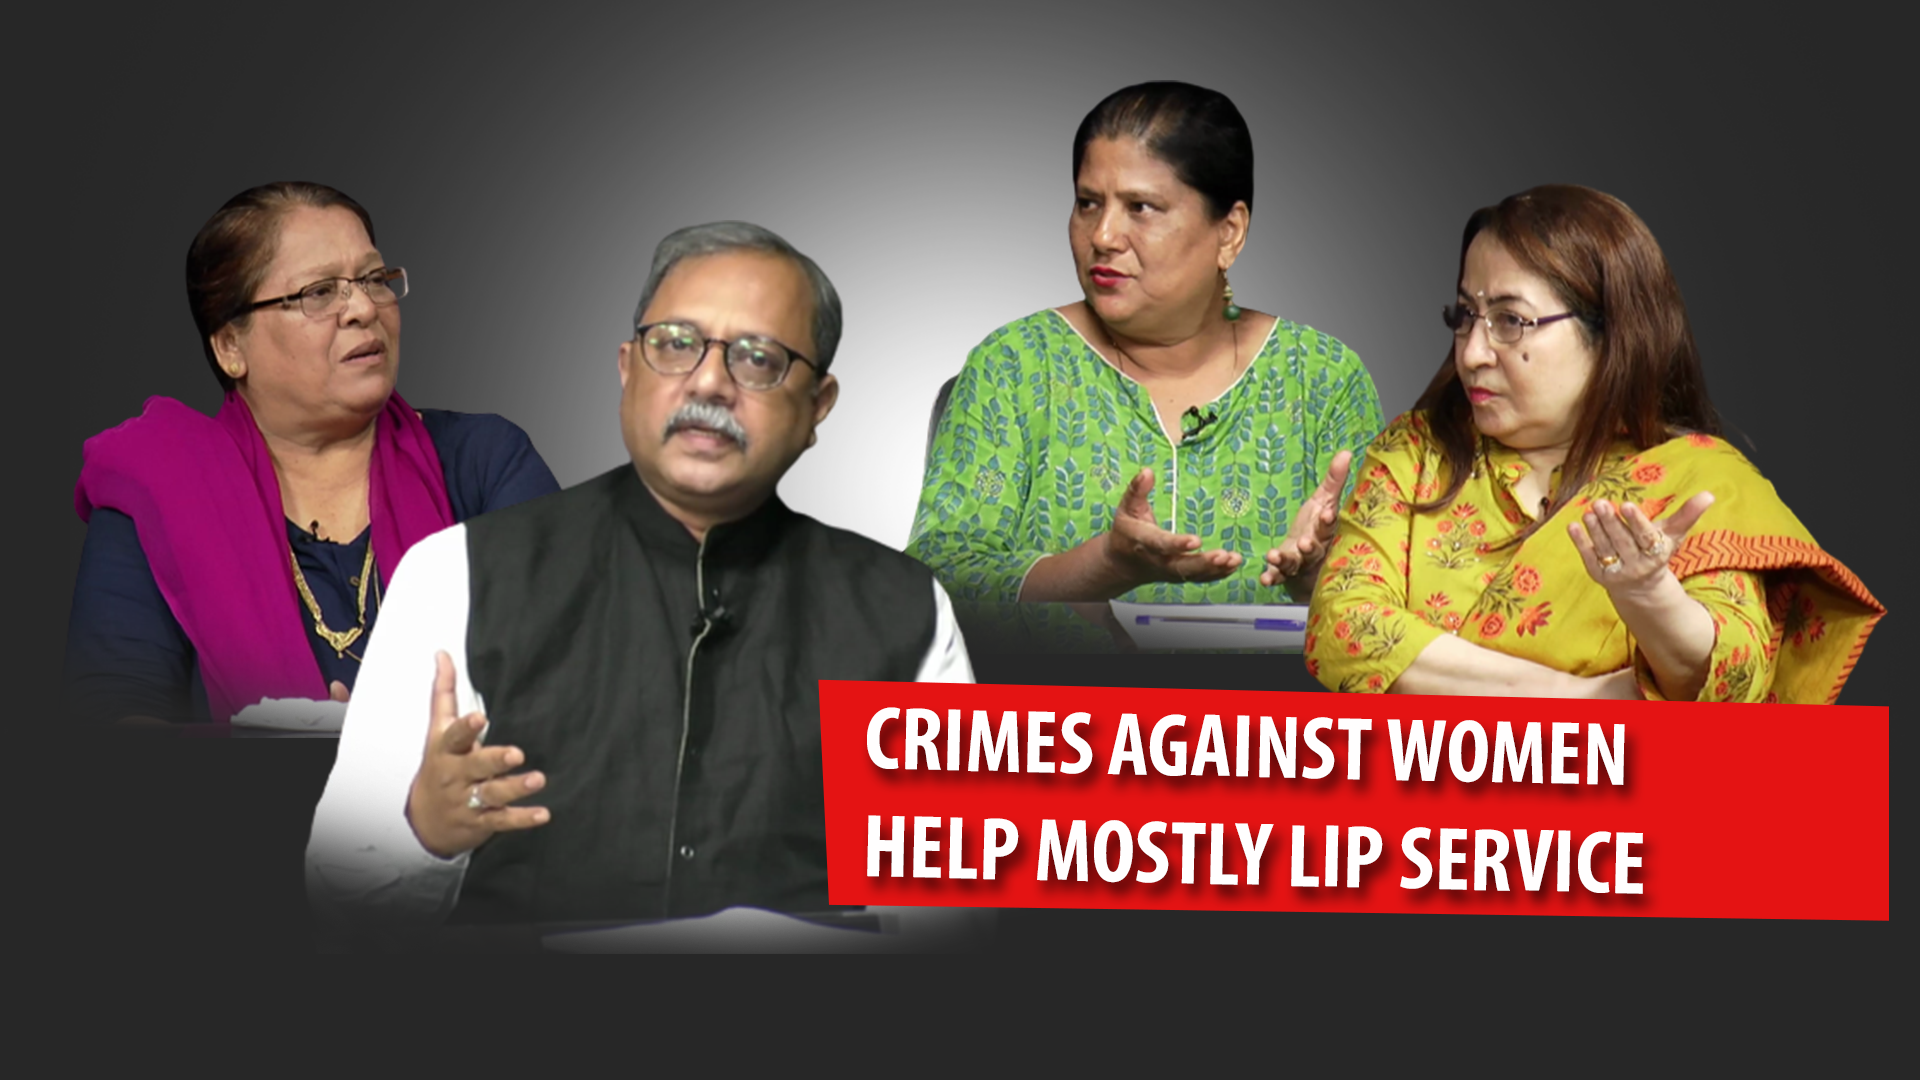 CRIMES AGAINST WOMEN – HELP MOSTLY LIP SERVICE